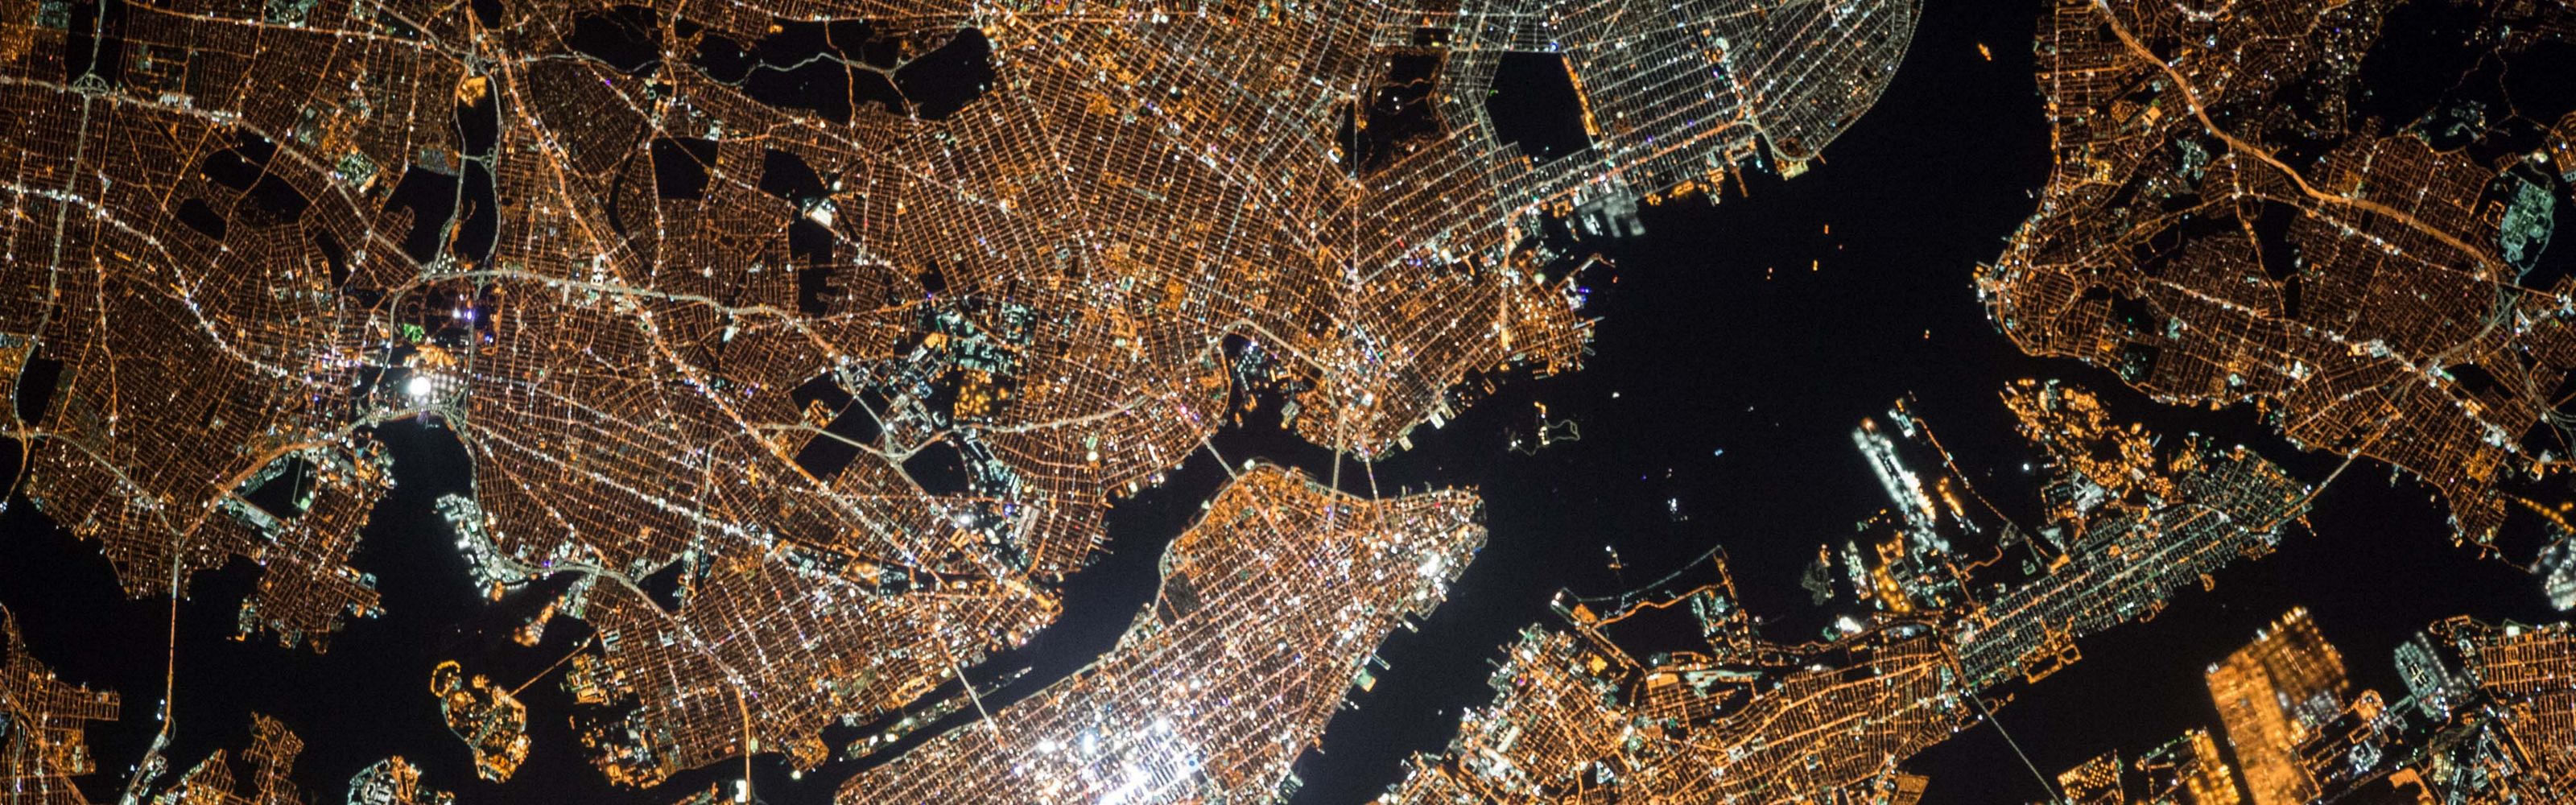 Aerial view of a city grid at night.